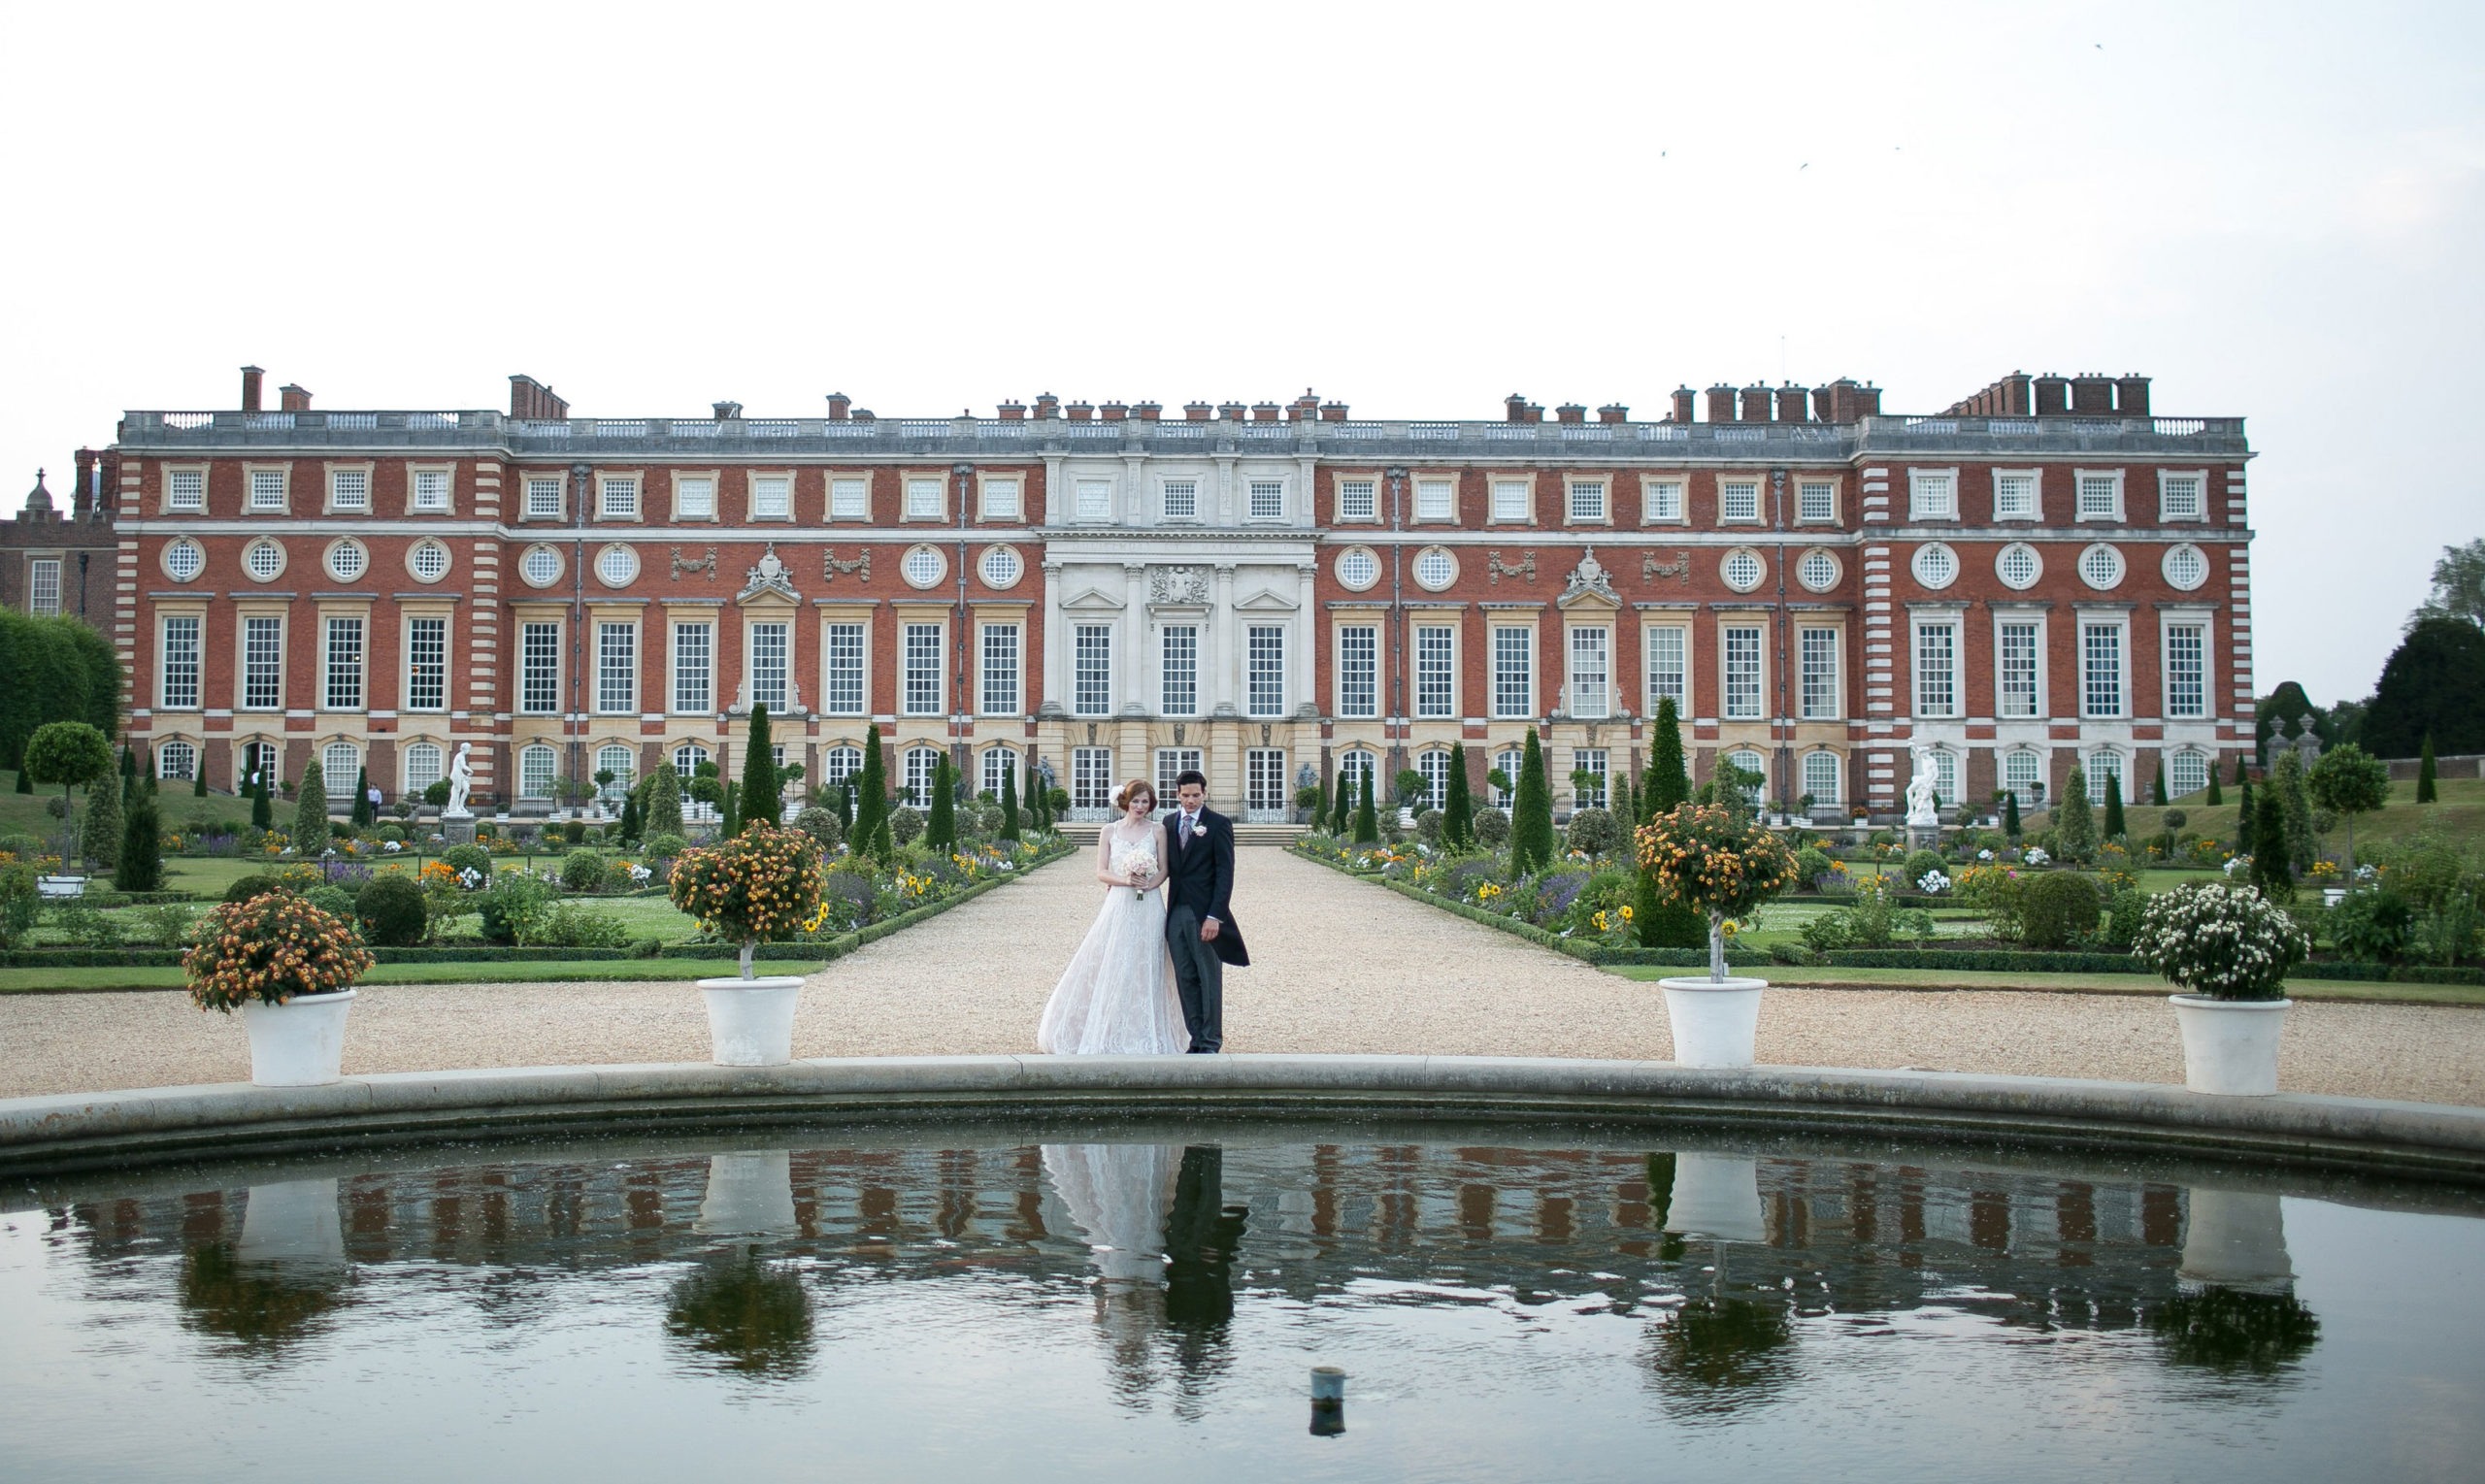 Wedding venues: grand country houses